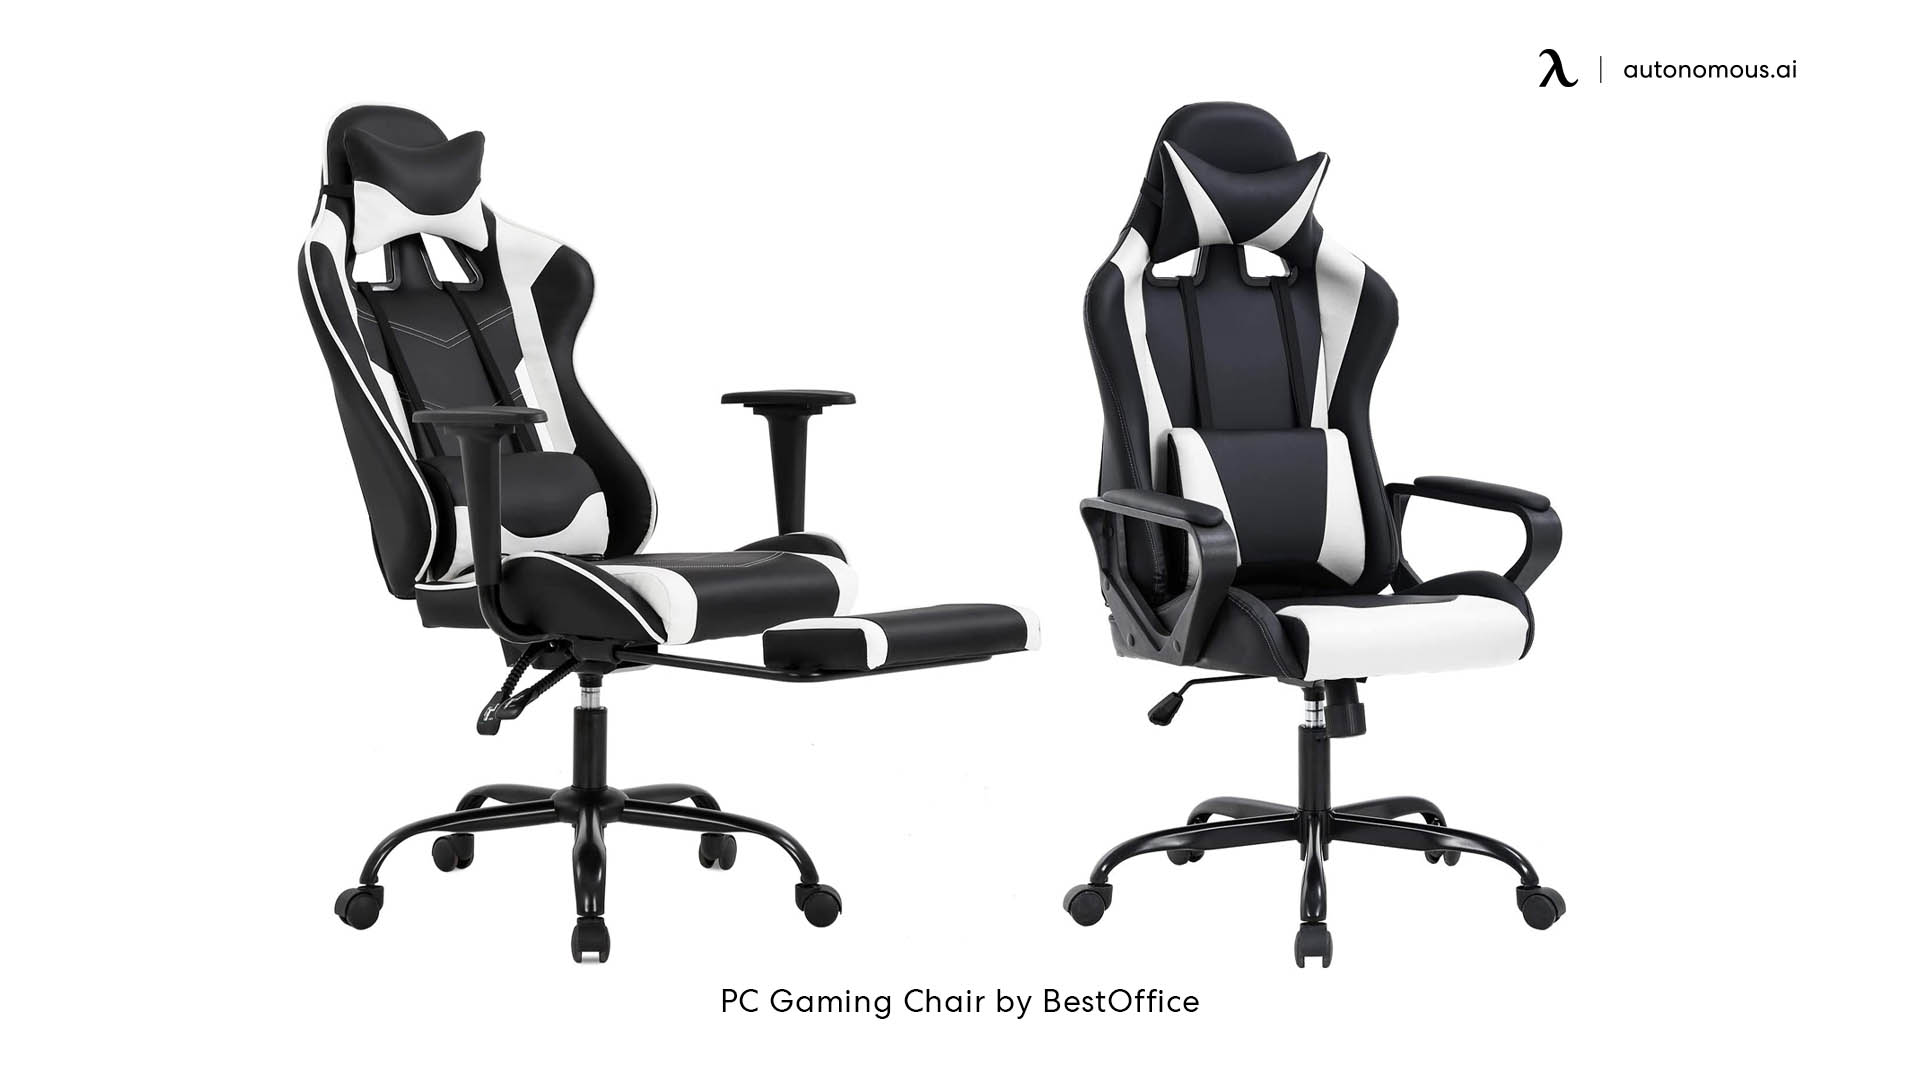 BestOffice's Big and Tall Gaming Chair